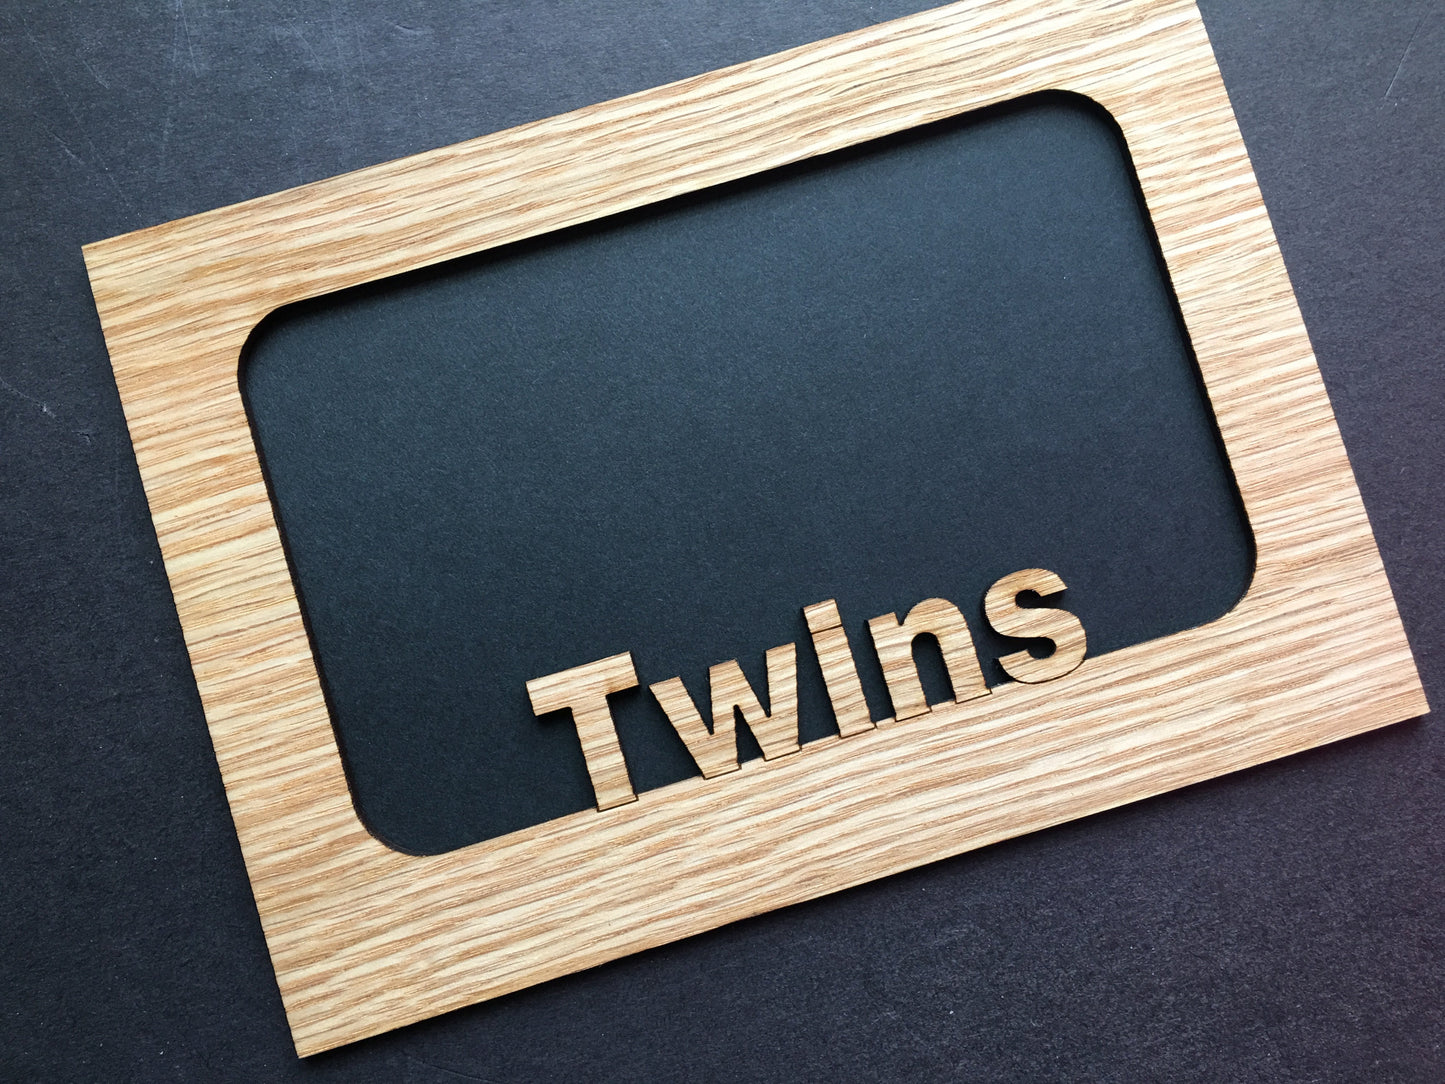 Twins Picture Frame - 5x7 Frame Hold 4x6 Photo